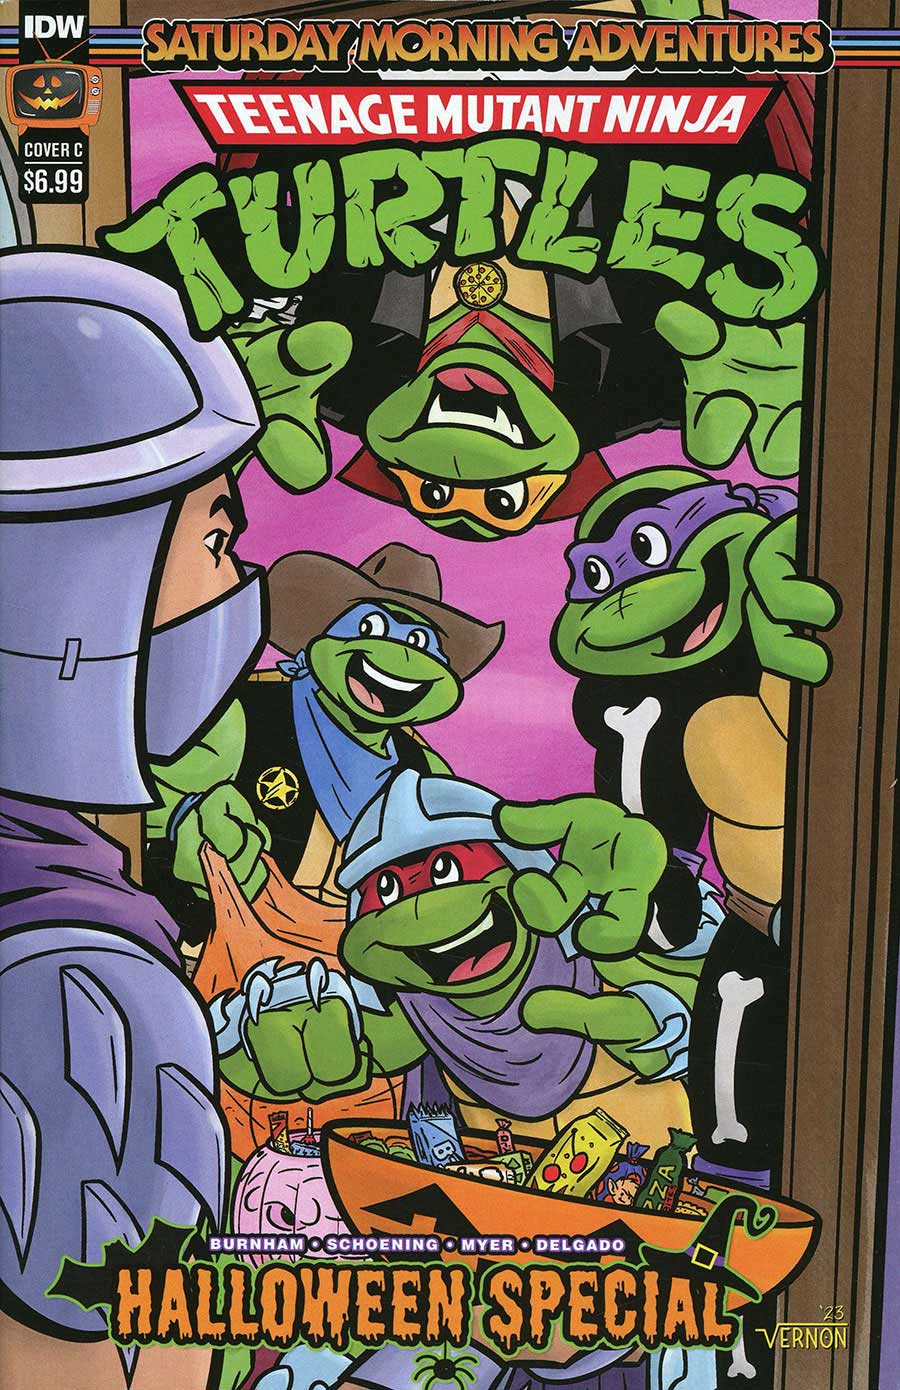 Teenage Mutant Ninja Turtles Saturday Morning Adventures Halloween Special #1 (One Shot) Cover C Variant Vernon Smith Cover